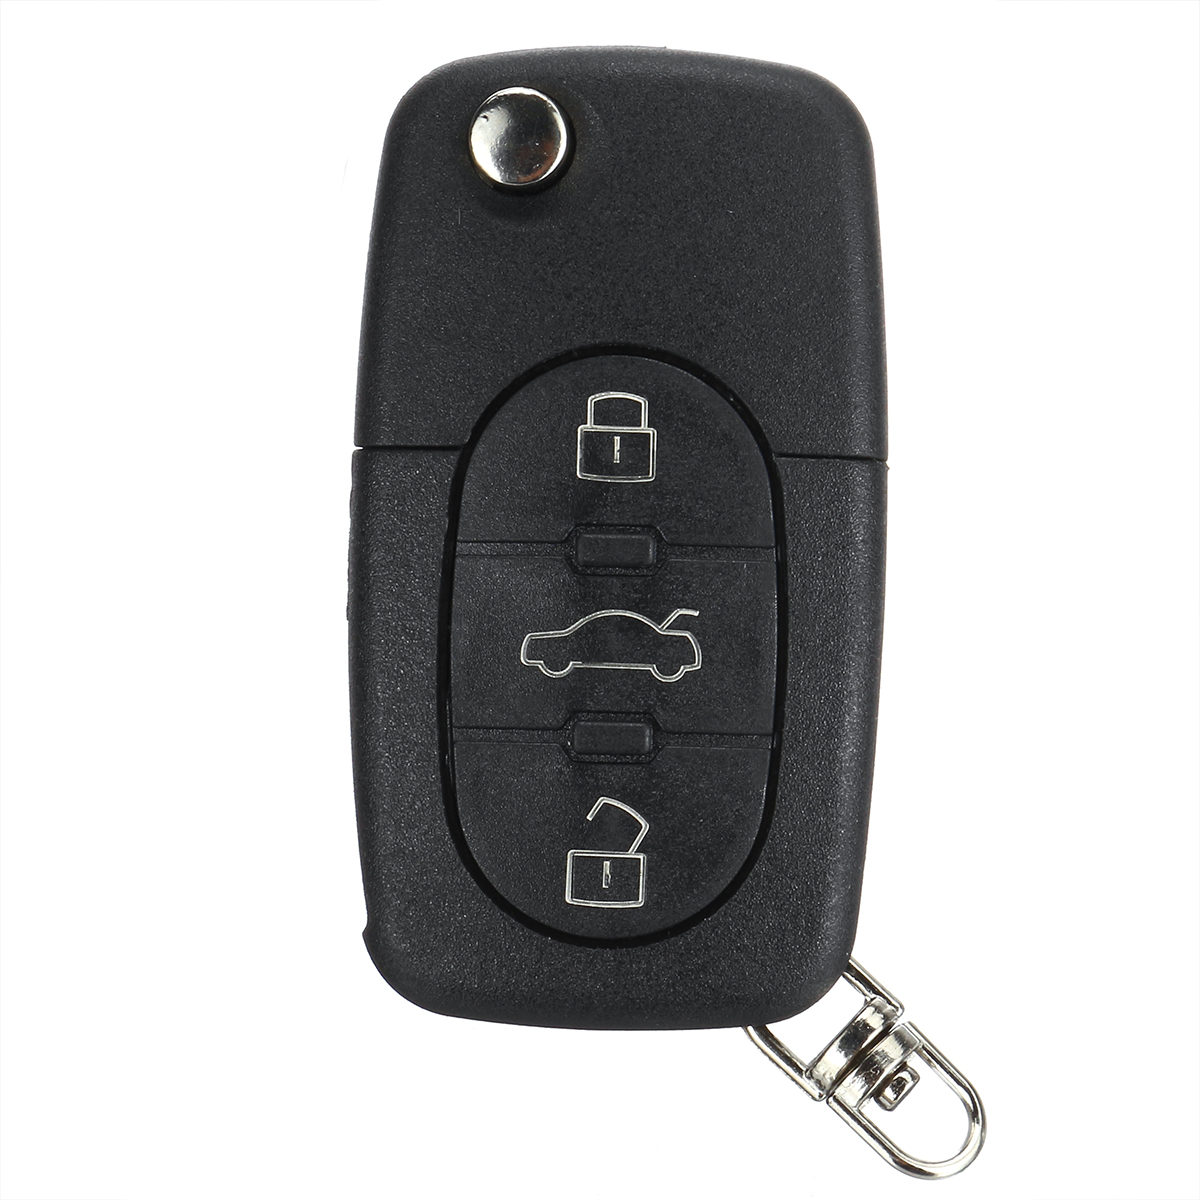 

3 PCS Black Buttons Car Remote Key Fob with Battery For Audi A2 A3 A4 A6 A8 TT